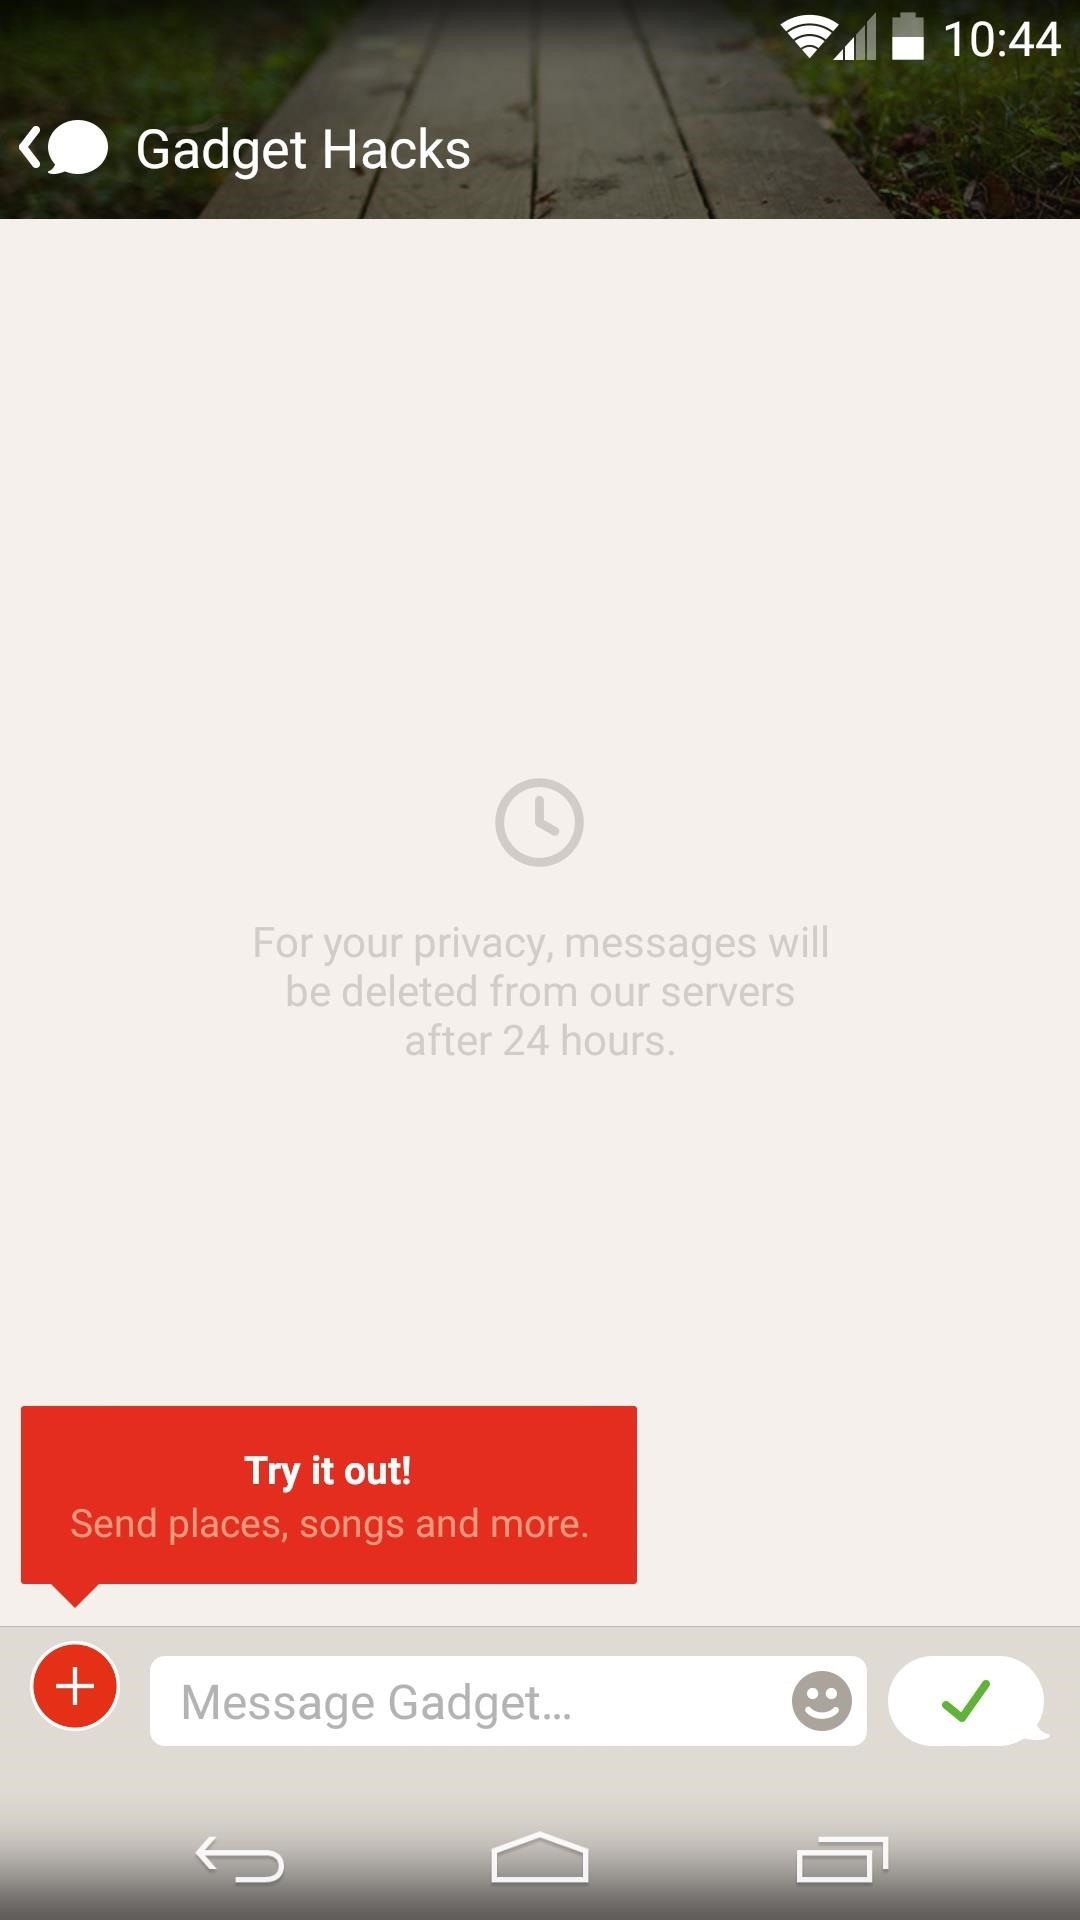 Path Talk App Lets You “Text” Businesses Instead of Calling Them